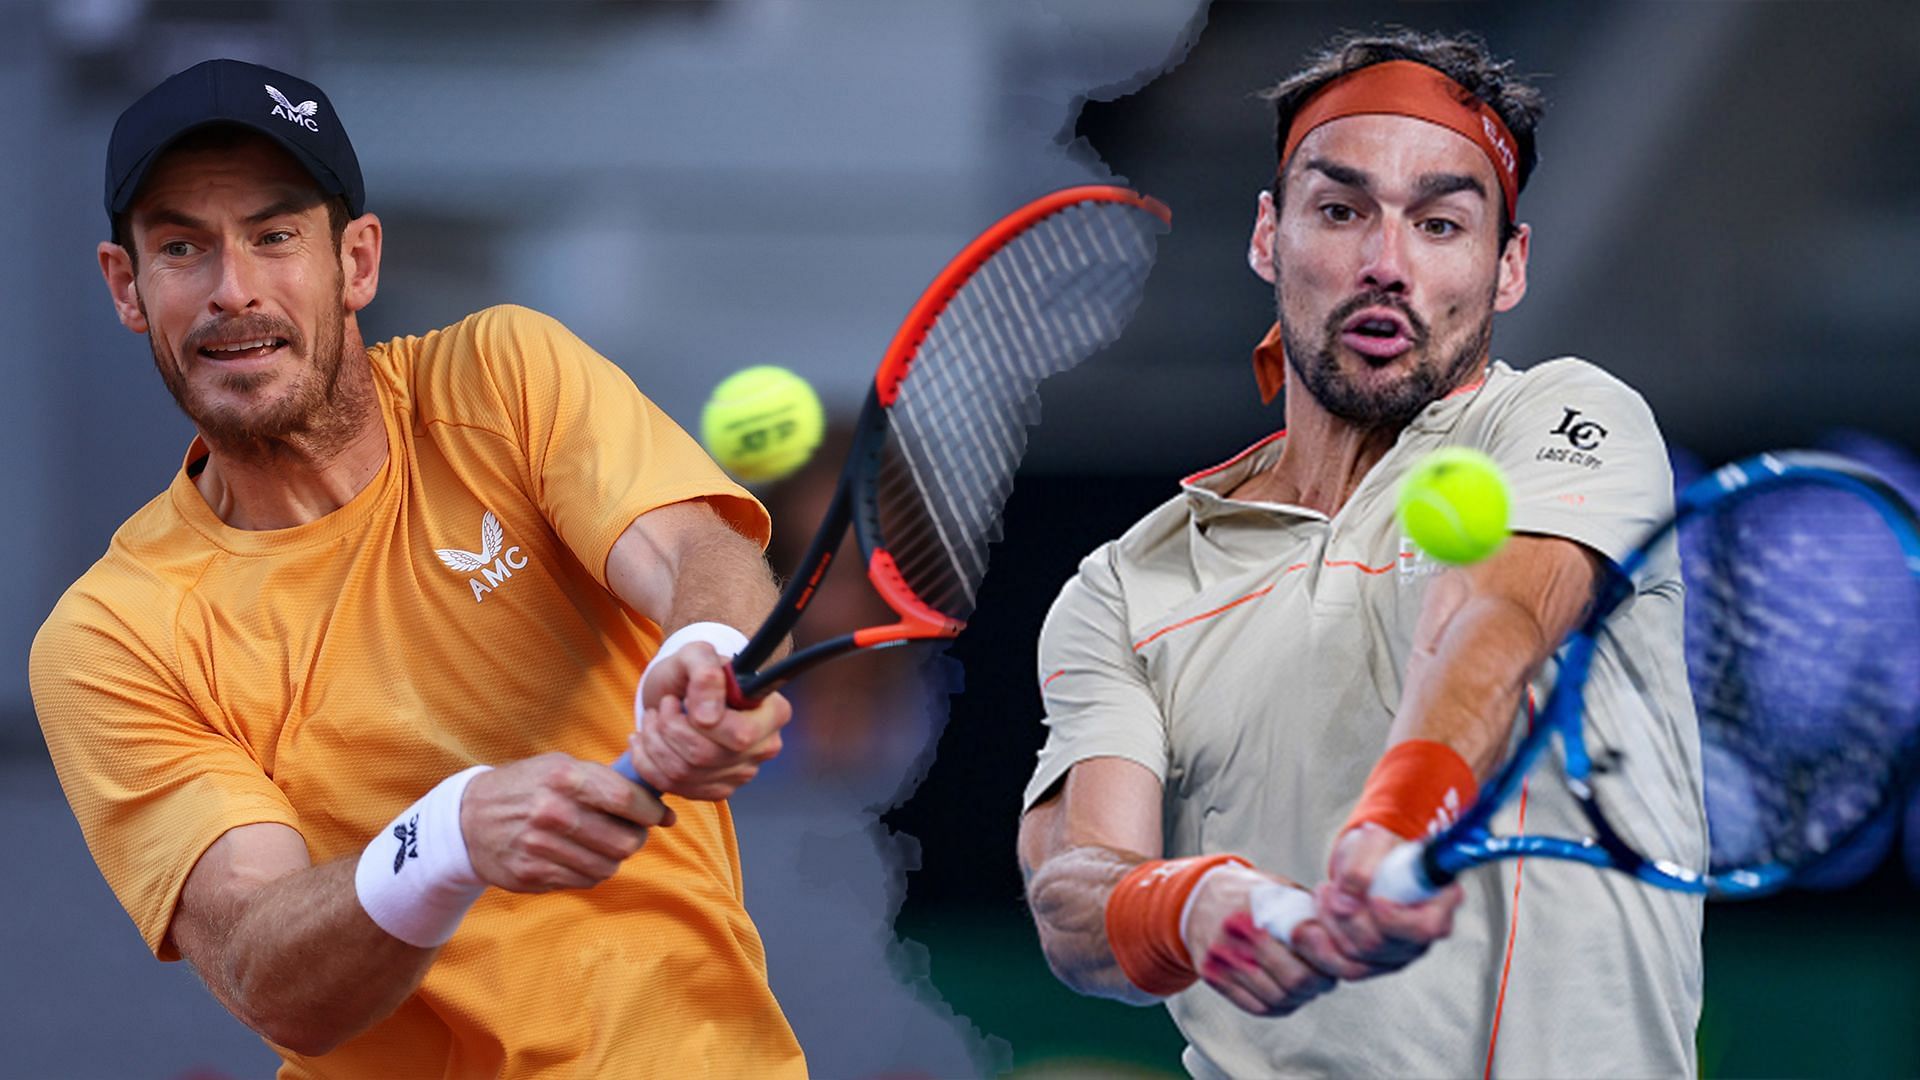 Andy Murray will take on Fabio Fognini in the first round of the Italian Open